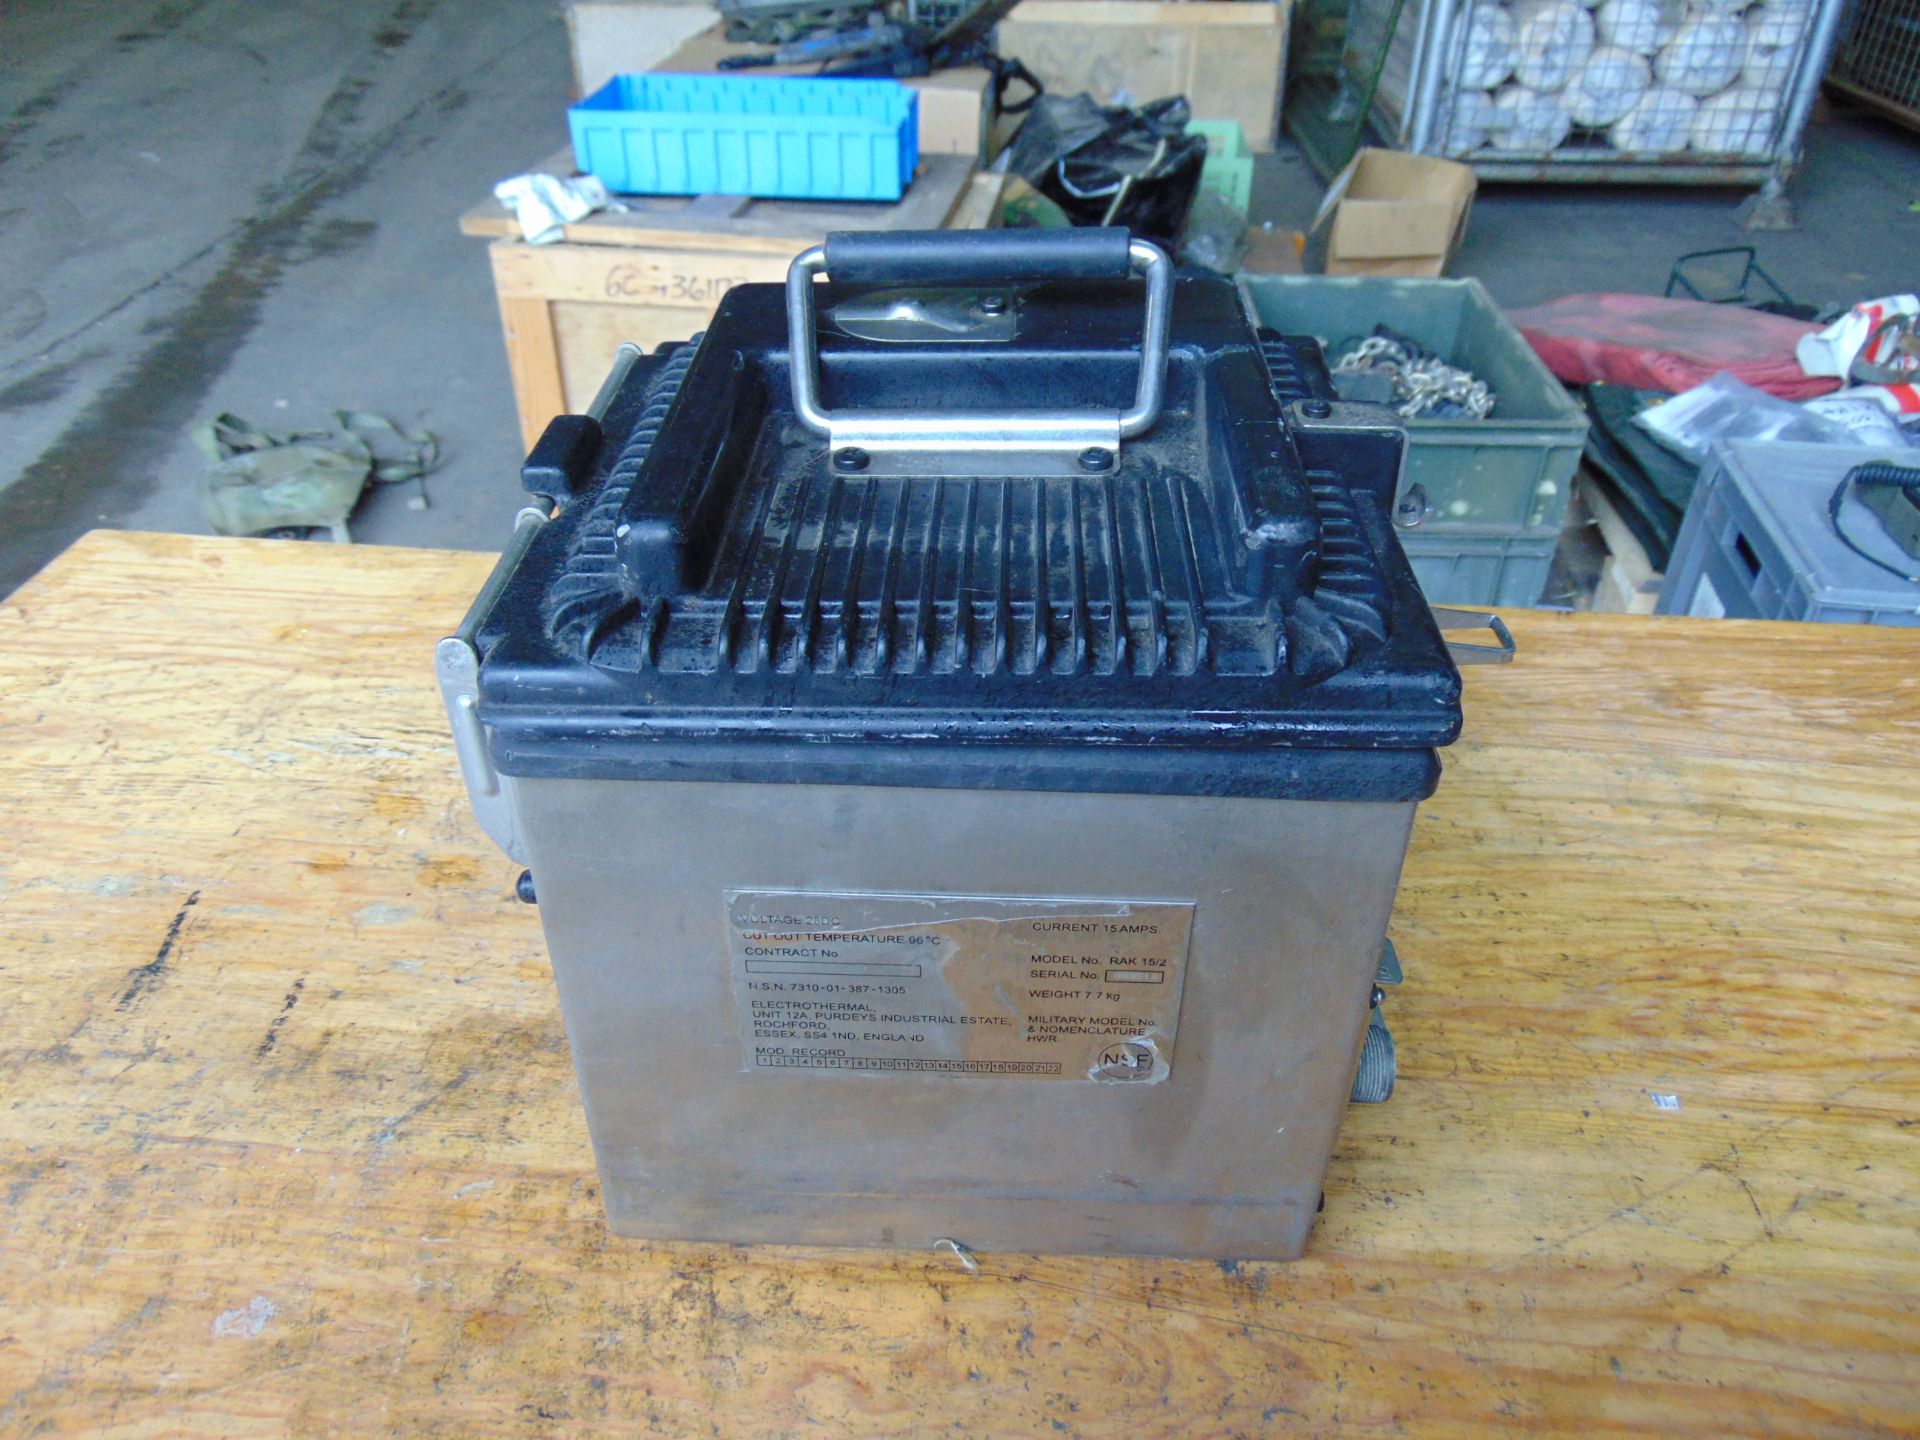 British Army Vehicle Cooker for Cooking & Heating - Image 7 of 7